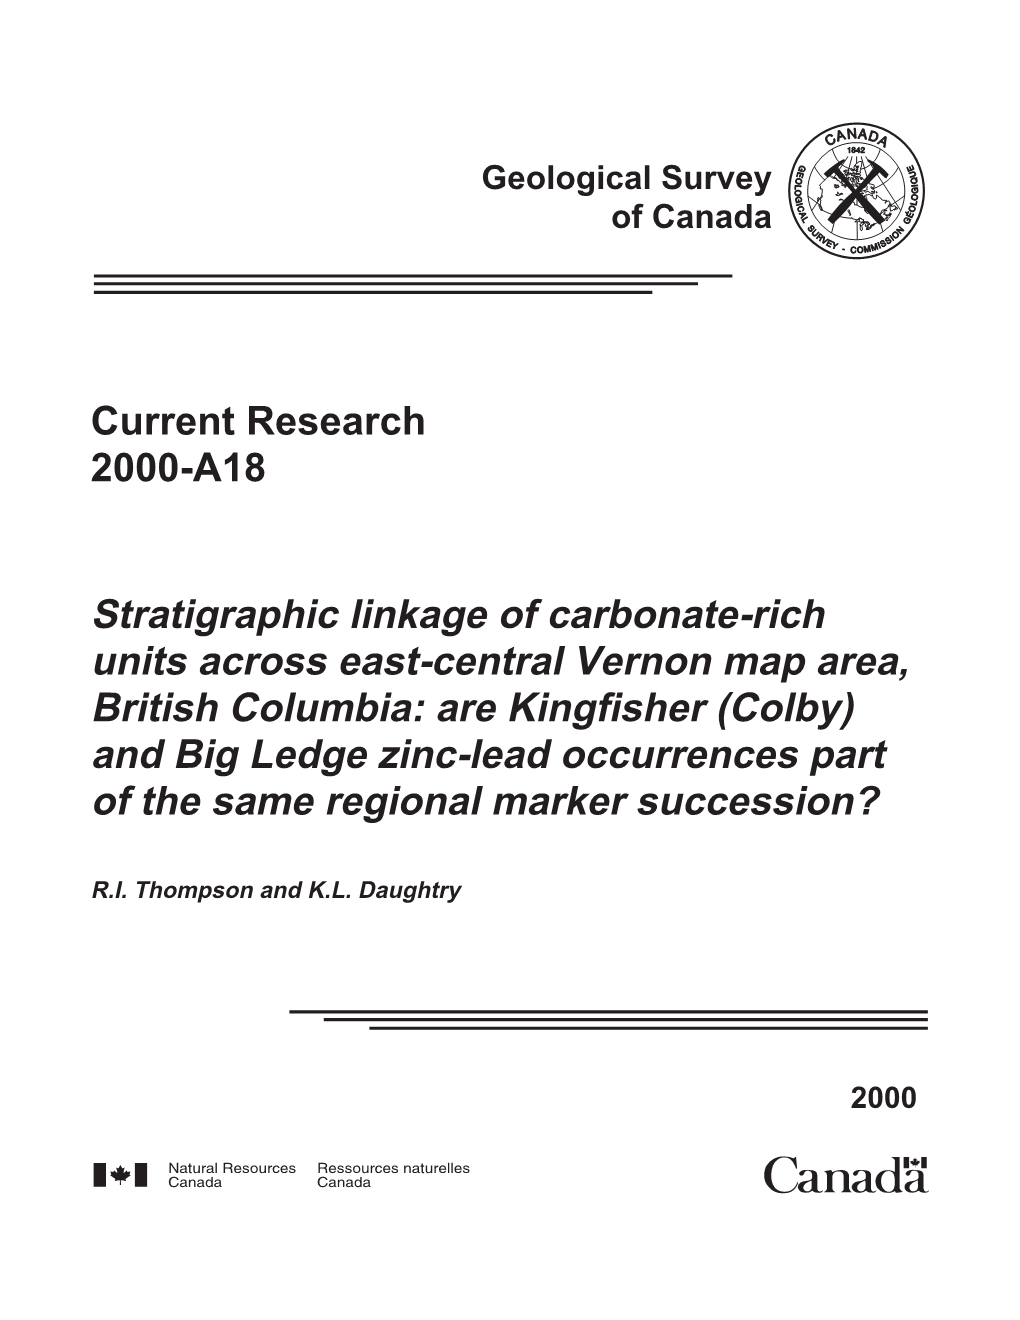 Stratigraphic Linkage of Carbonate-Rich Units Across East